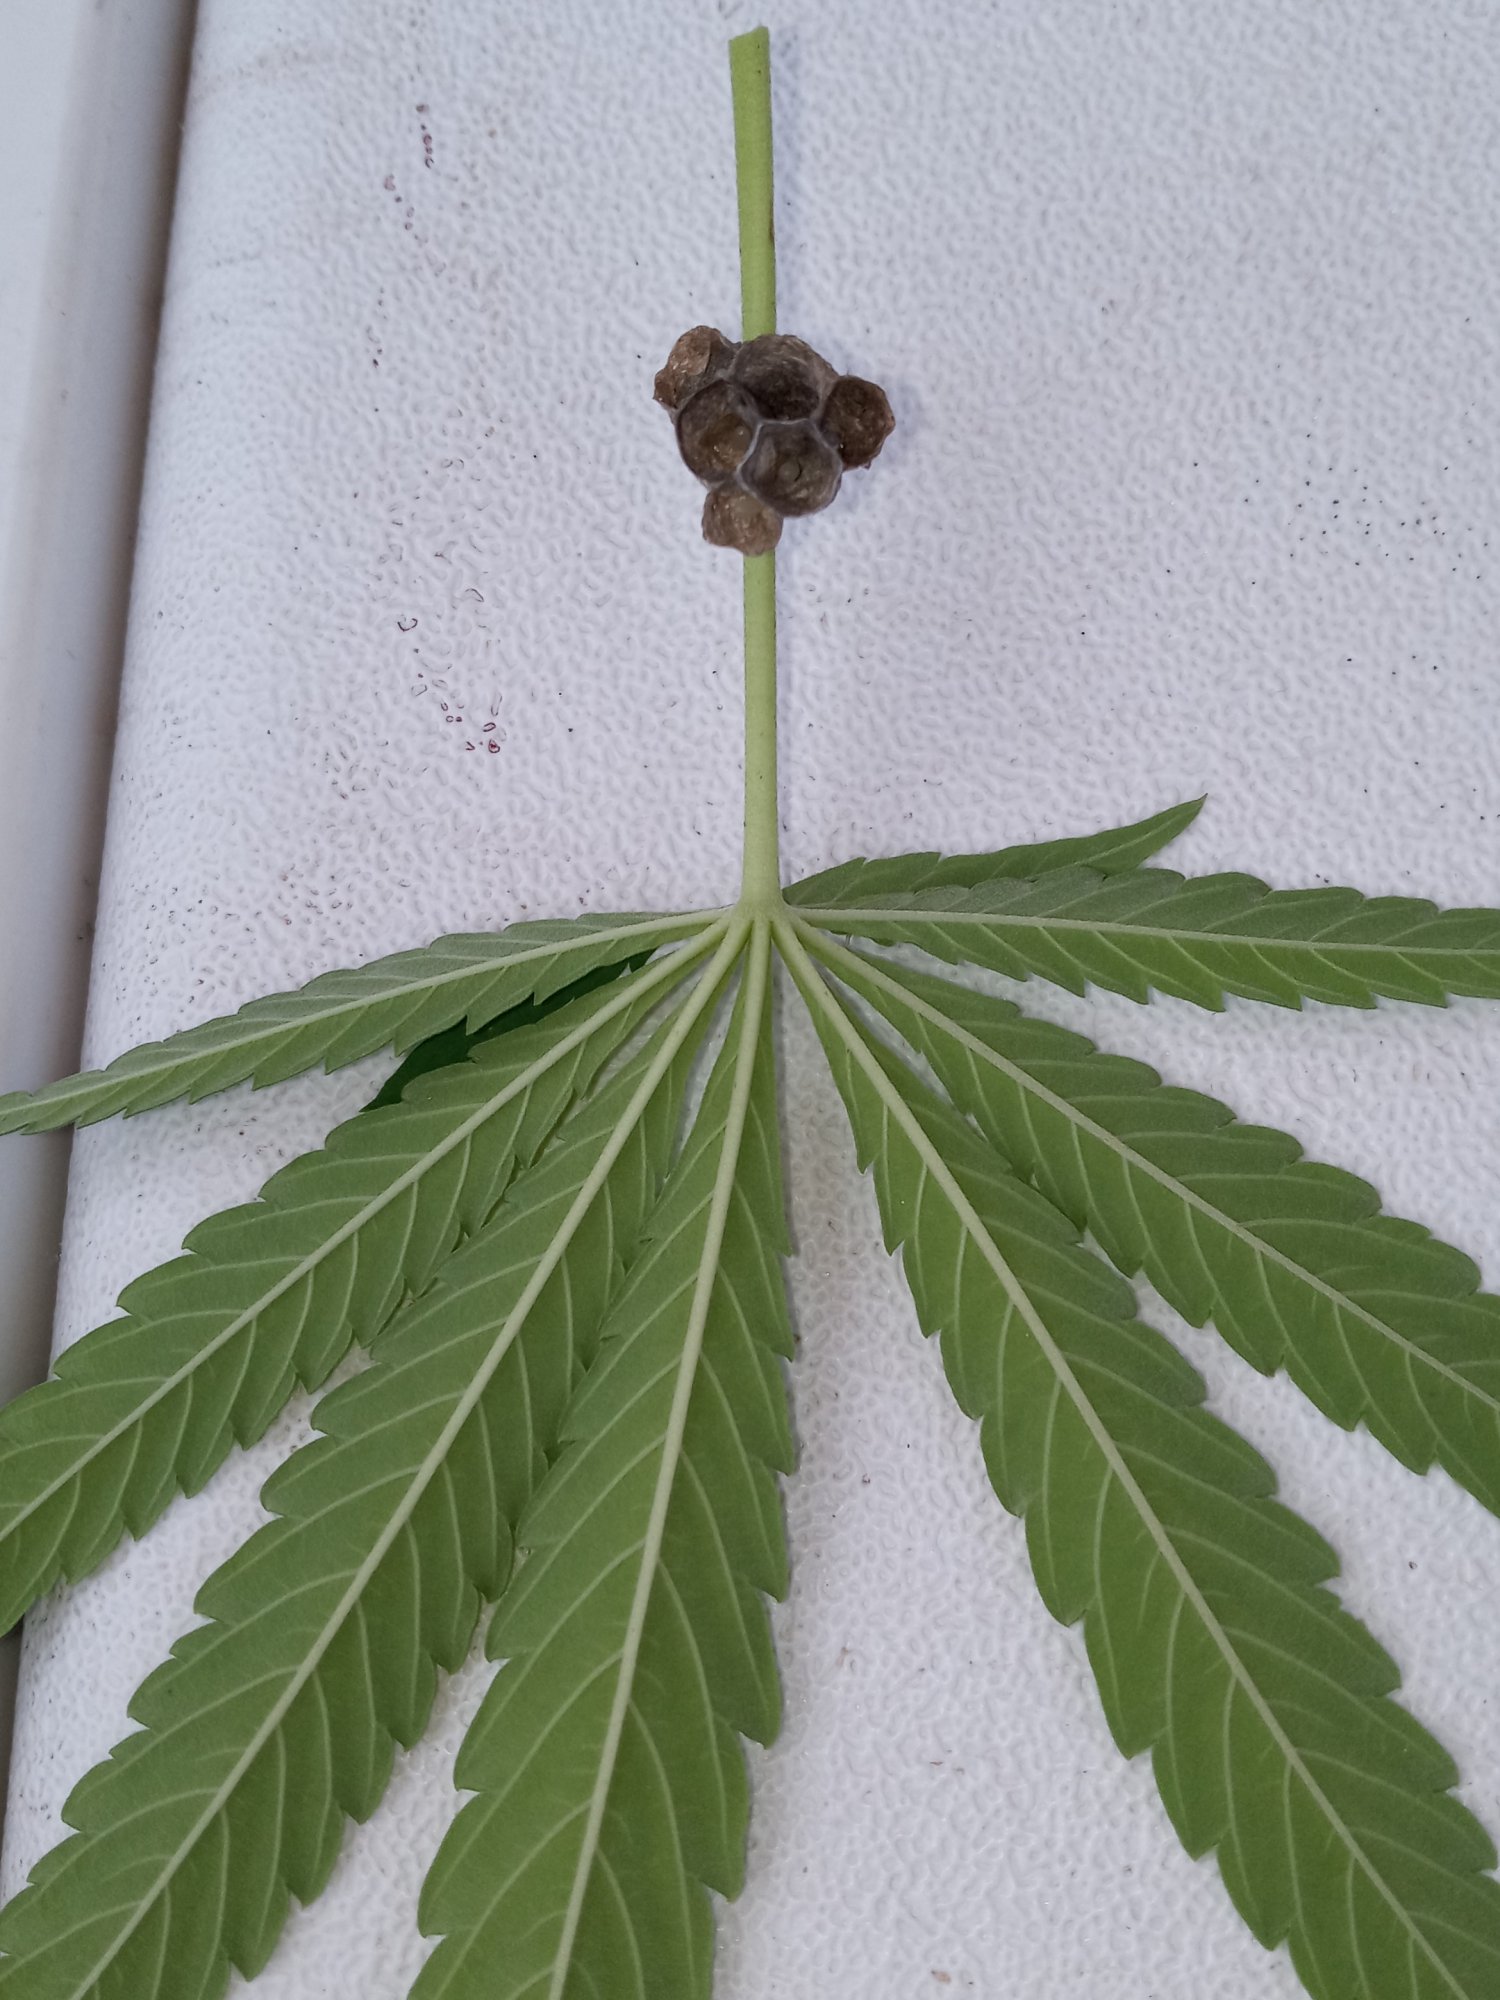 Look what i found in my plant 2